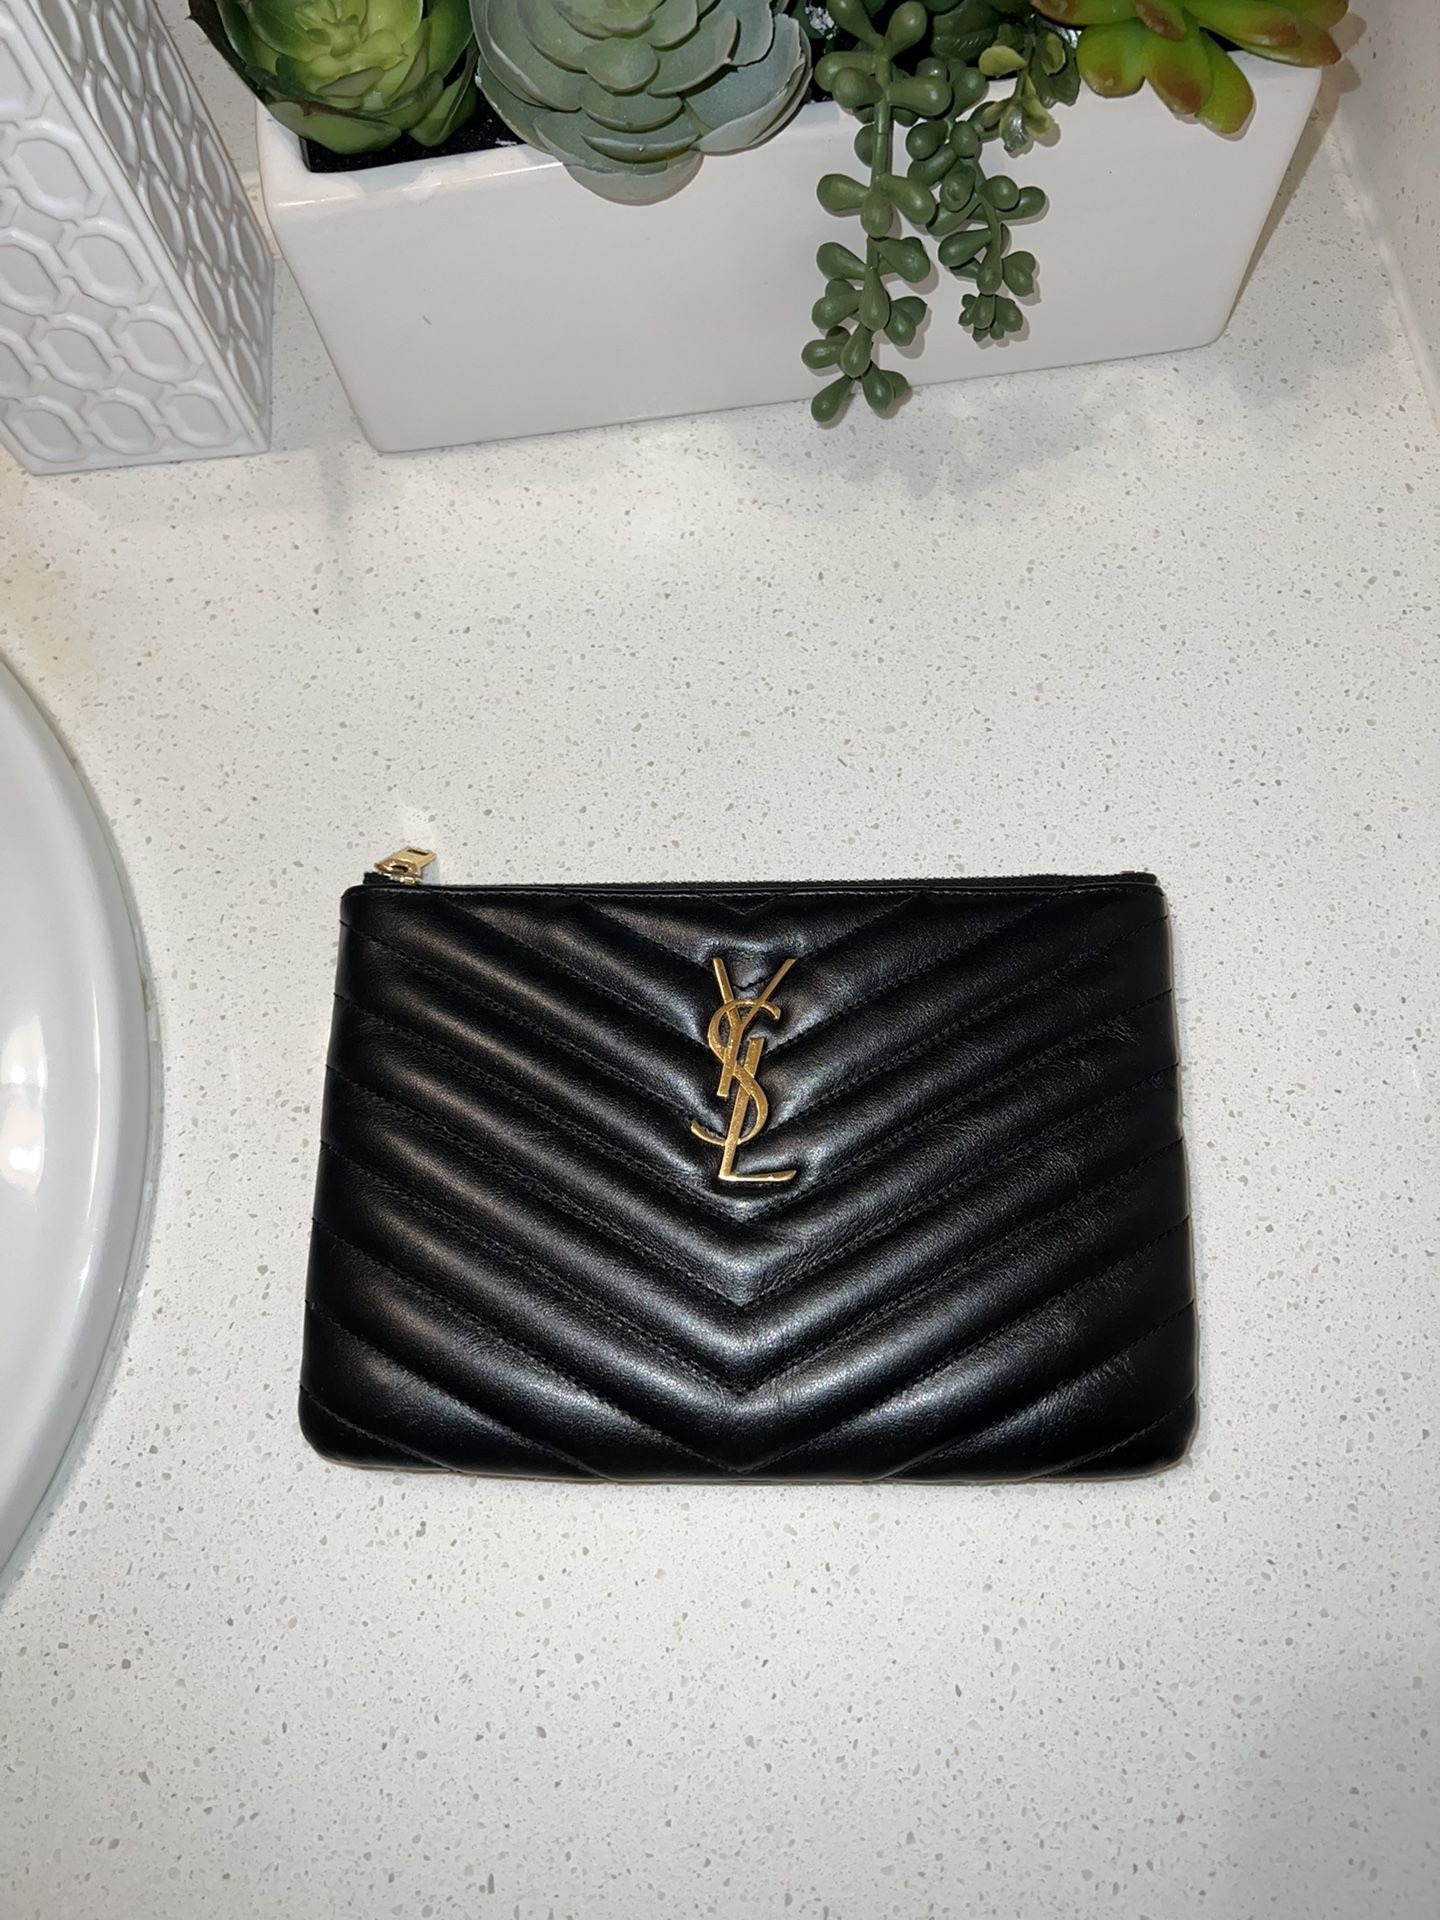 YSL SMALL POUCH/wallet. Authentic 